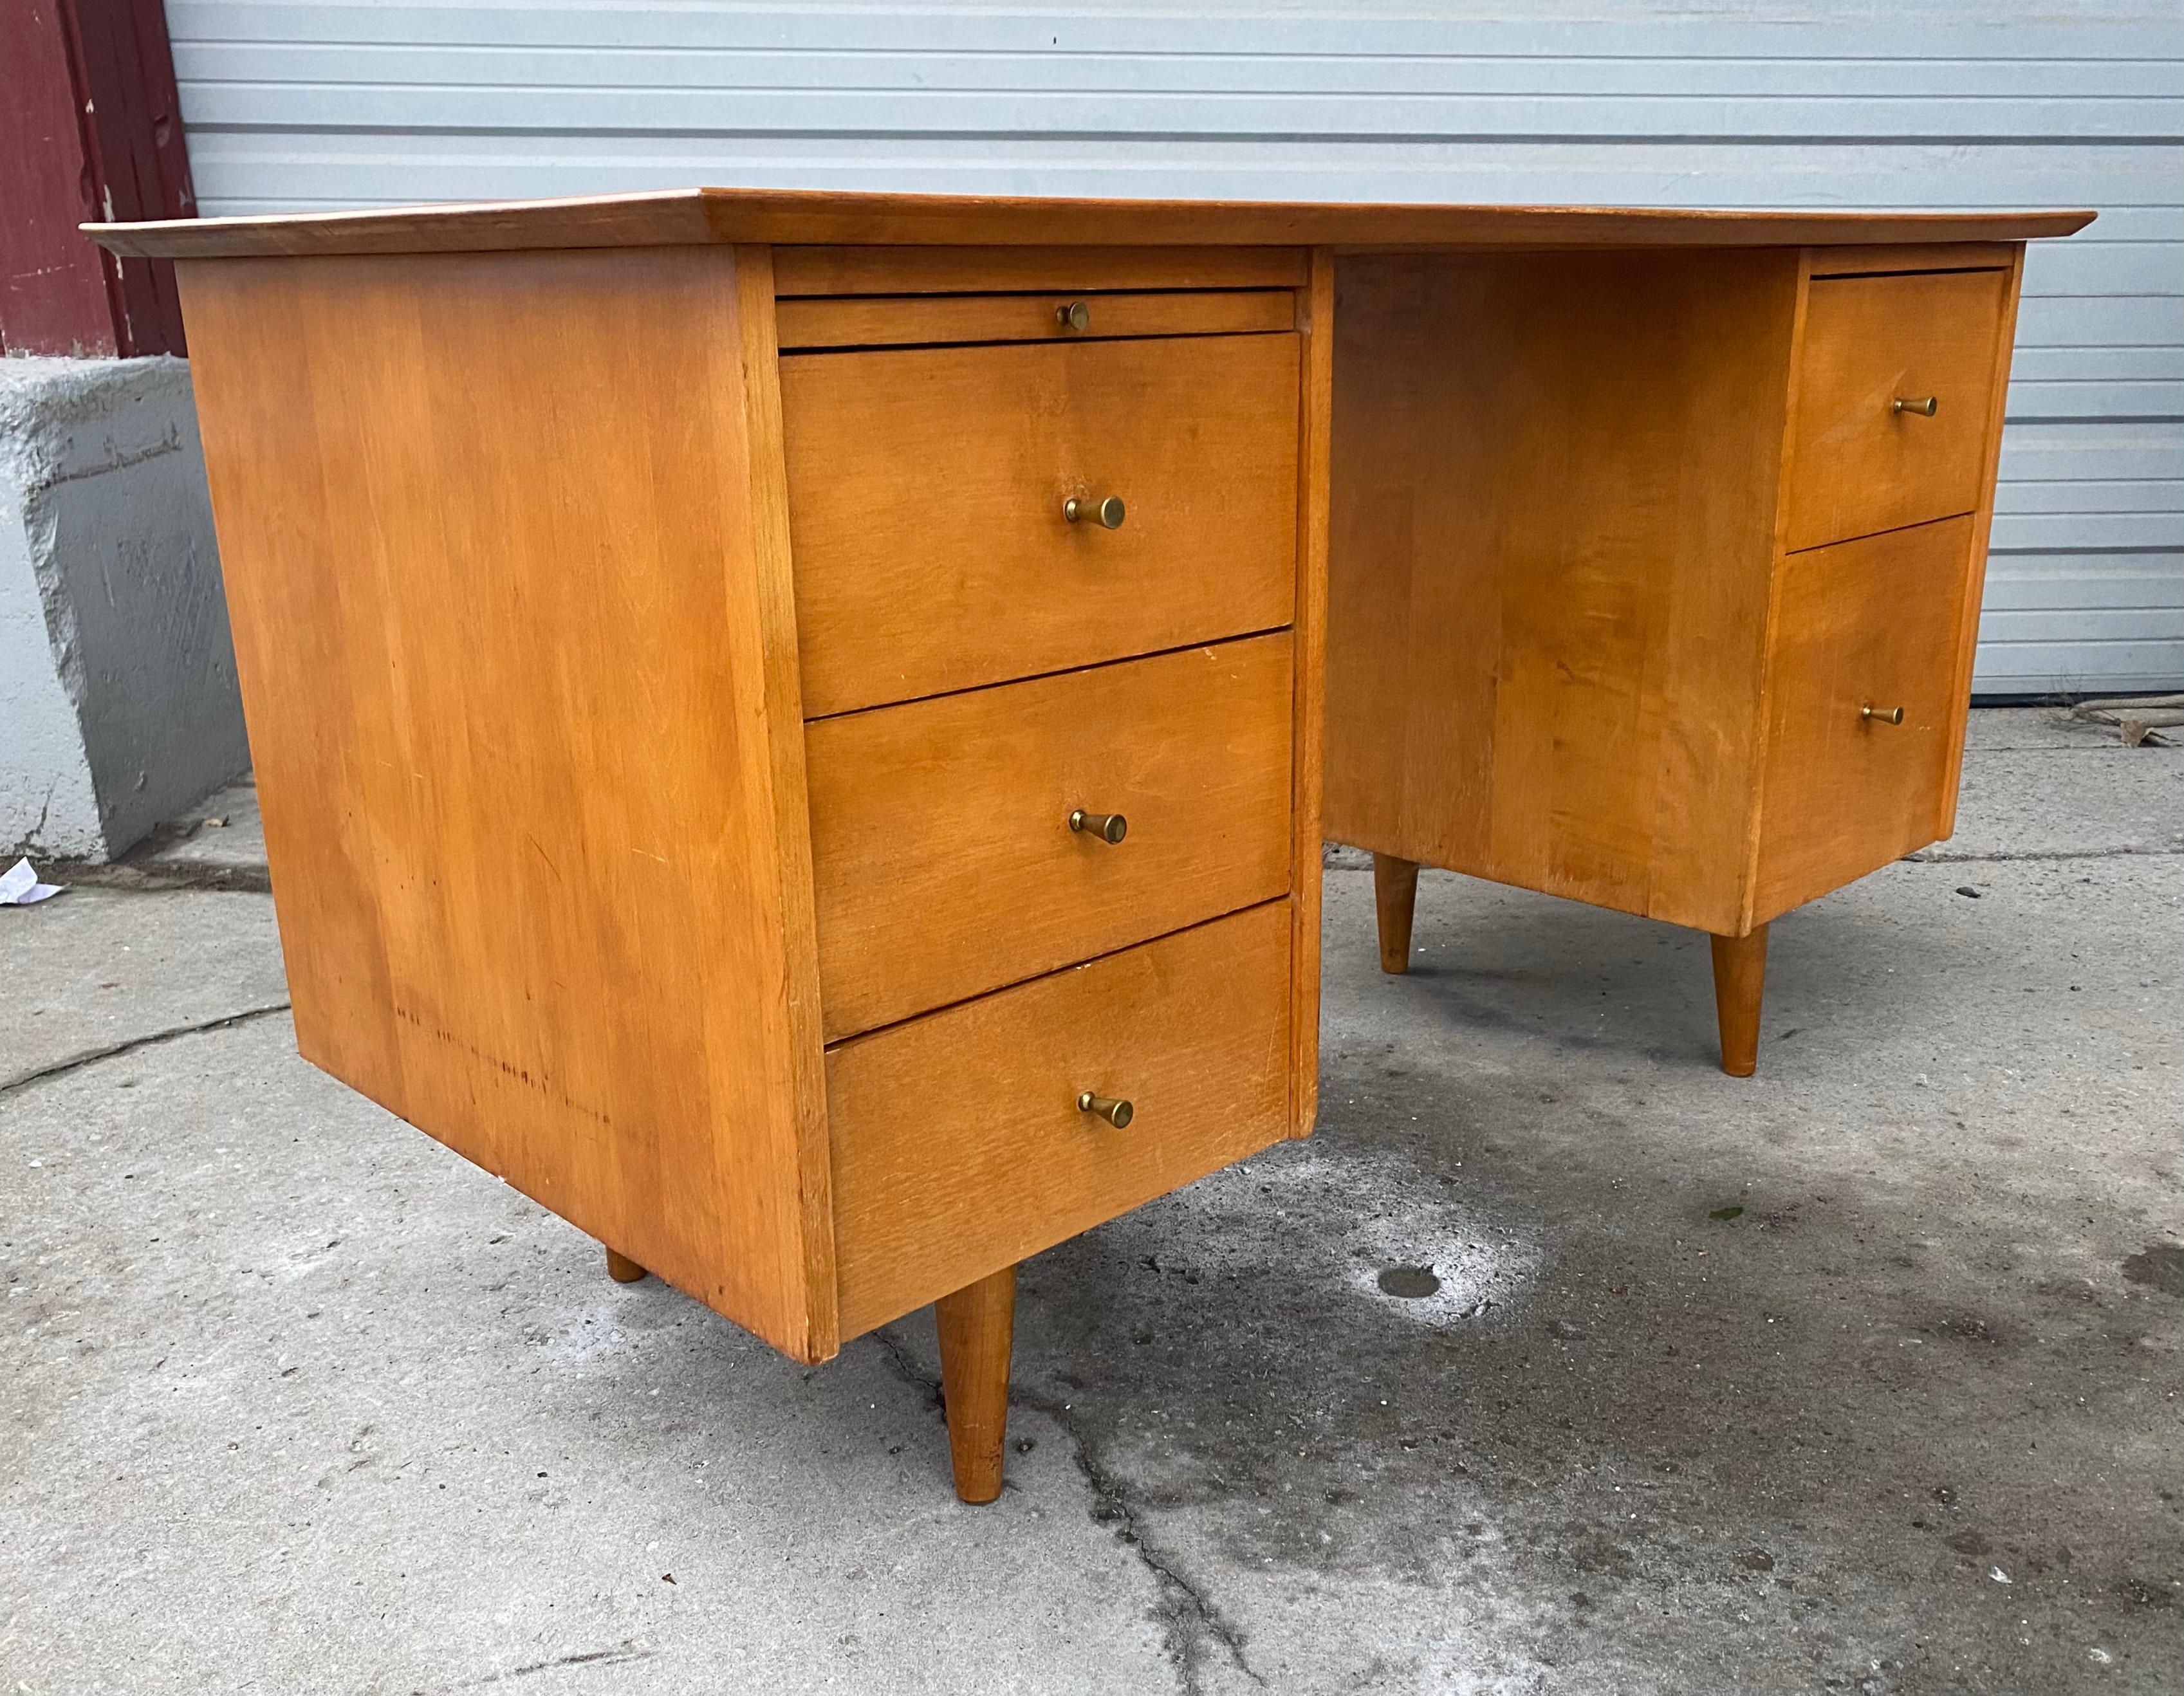 Midcentury maple double pedestal desk by Paul McCobb for Planner Group manufactured in the United States, circa 1950s. This modernist desk is beautifully constructed from the finest maple wood. The desk has three drawers on the left , pull out